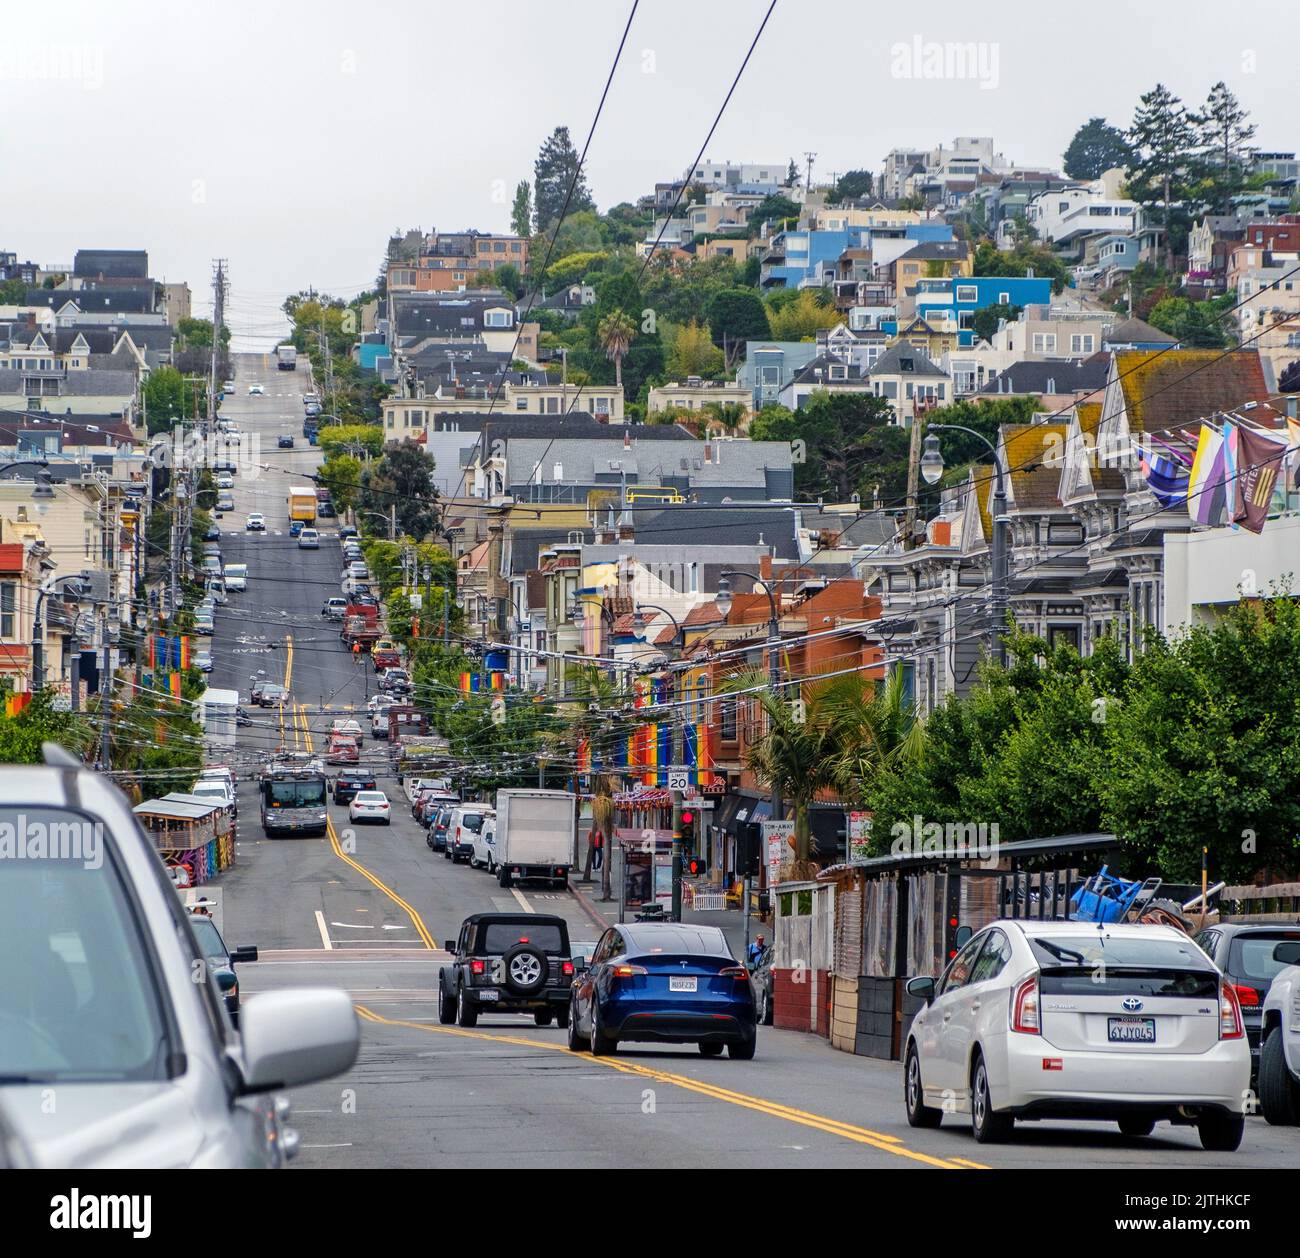 Castro Street, San Francisco, California. Hill with cars, houses, shops and rainbow flags. Stock Photo